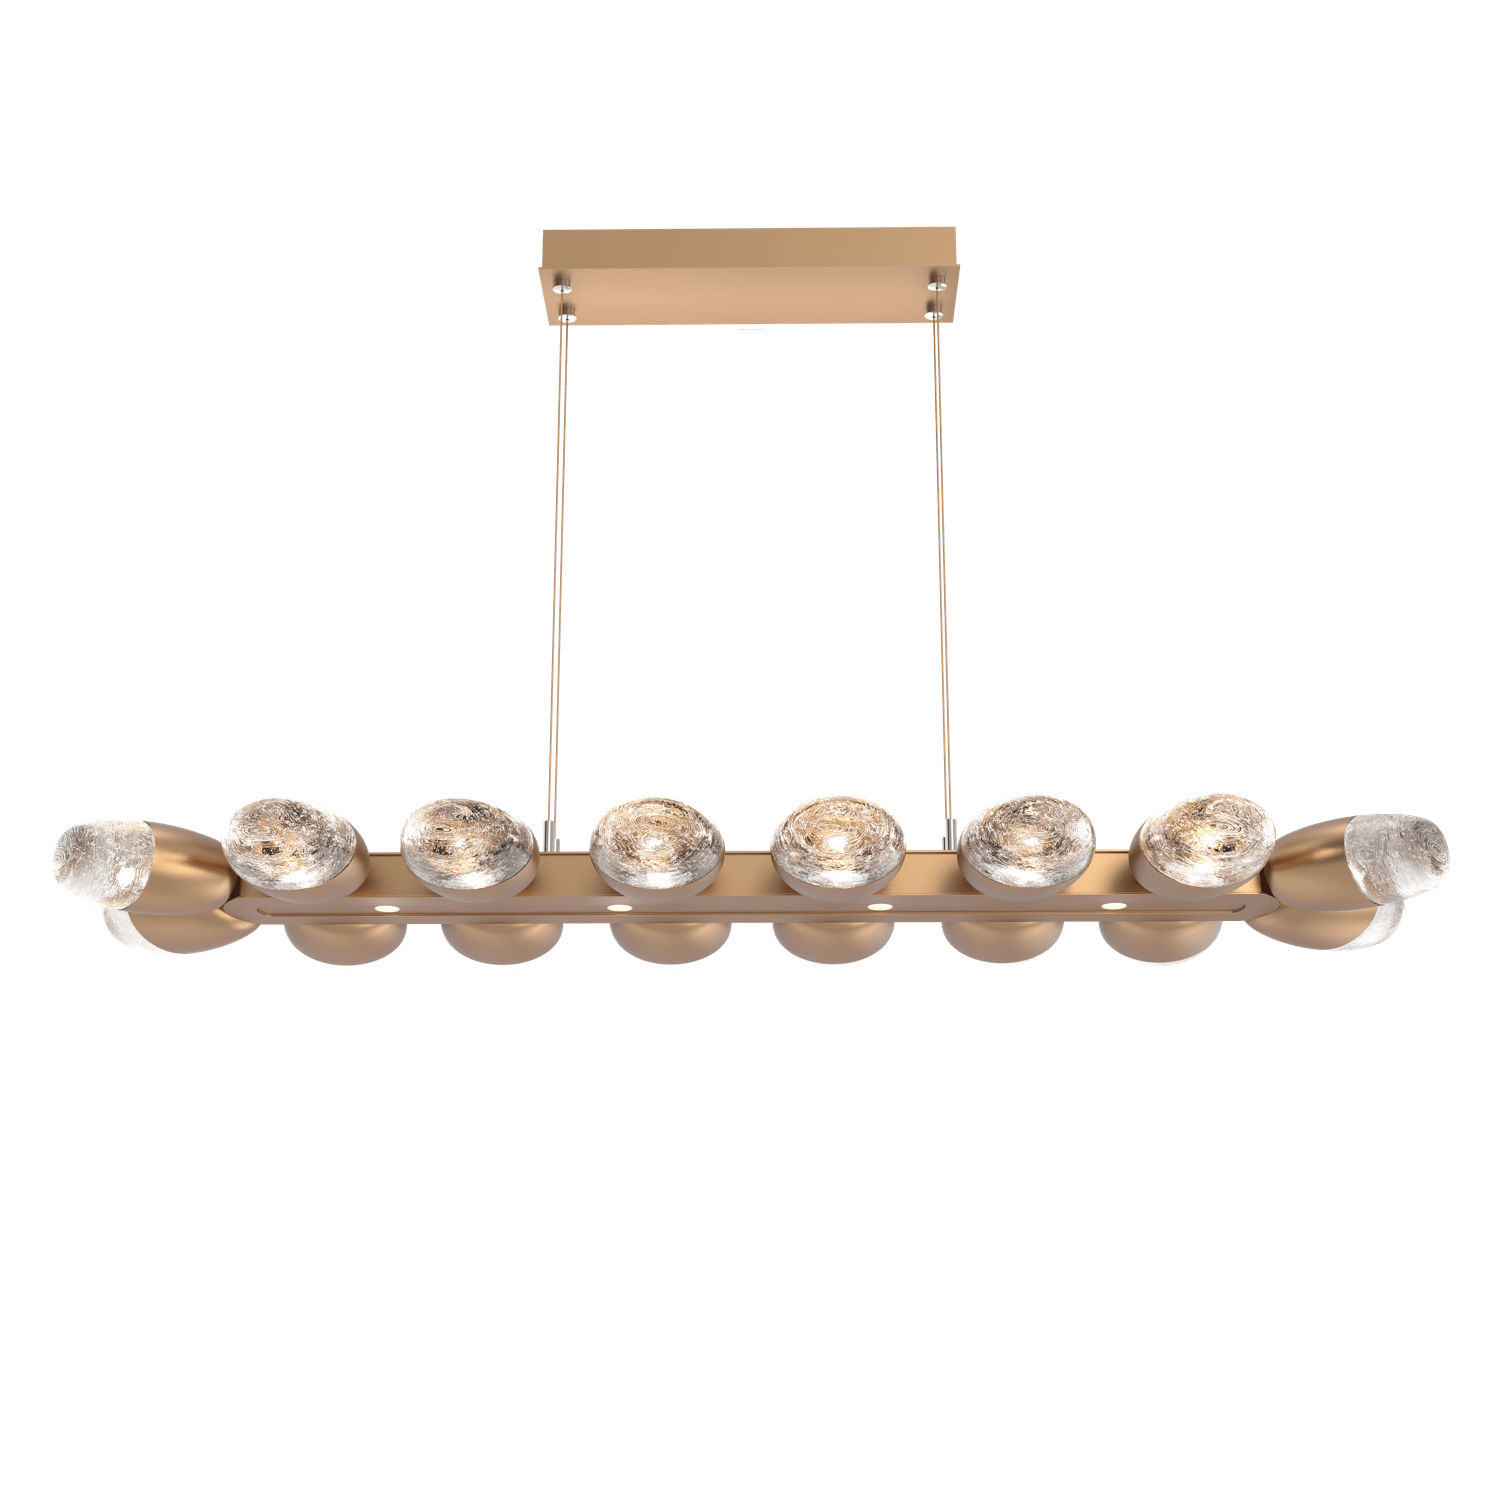 PLB0079-48-NB-Hammerton-Studio-Pebble-48-inch-linear-chandelier-with-novel-brass-finish-and-clear-cast-glass-shades-and-LED-lamping